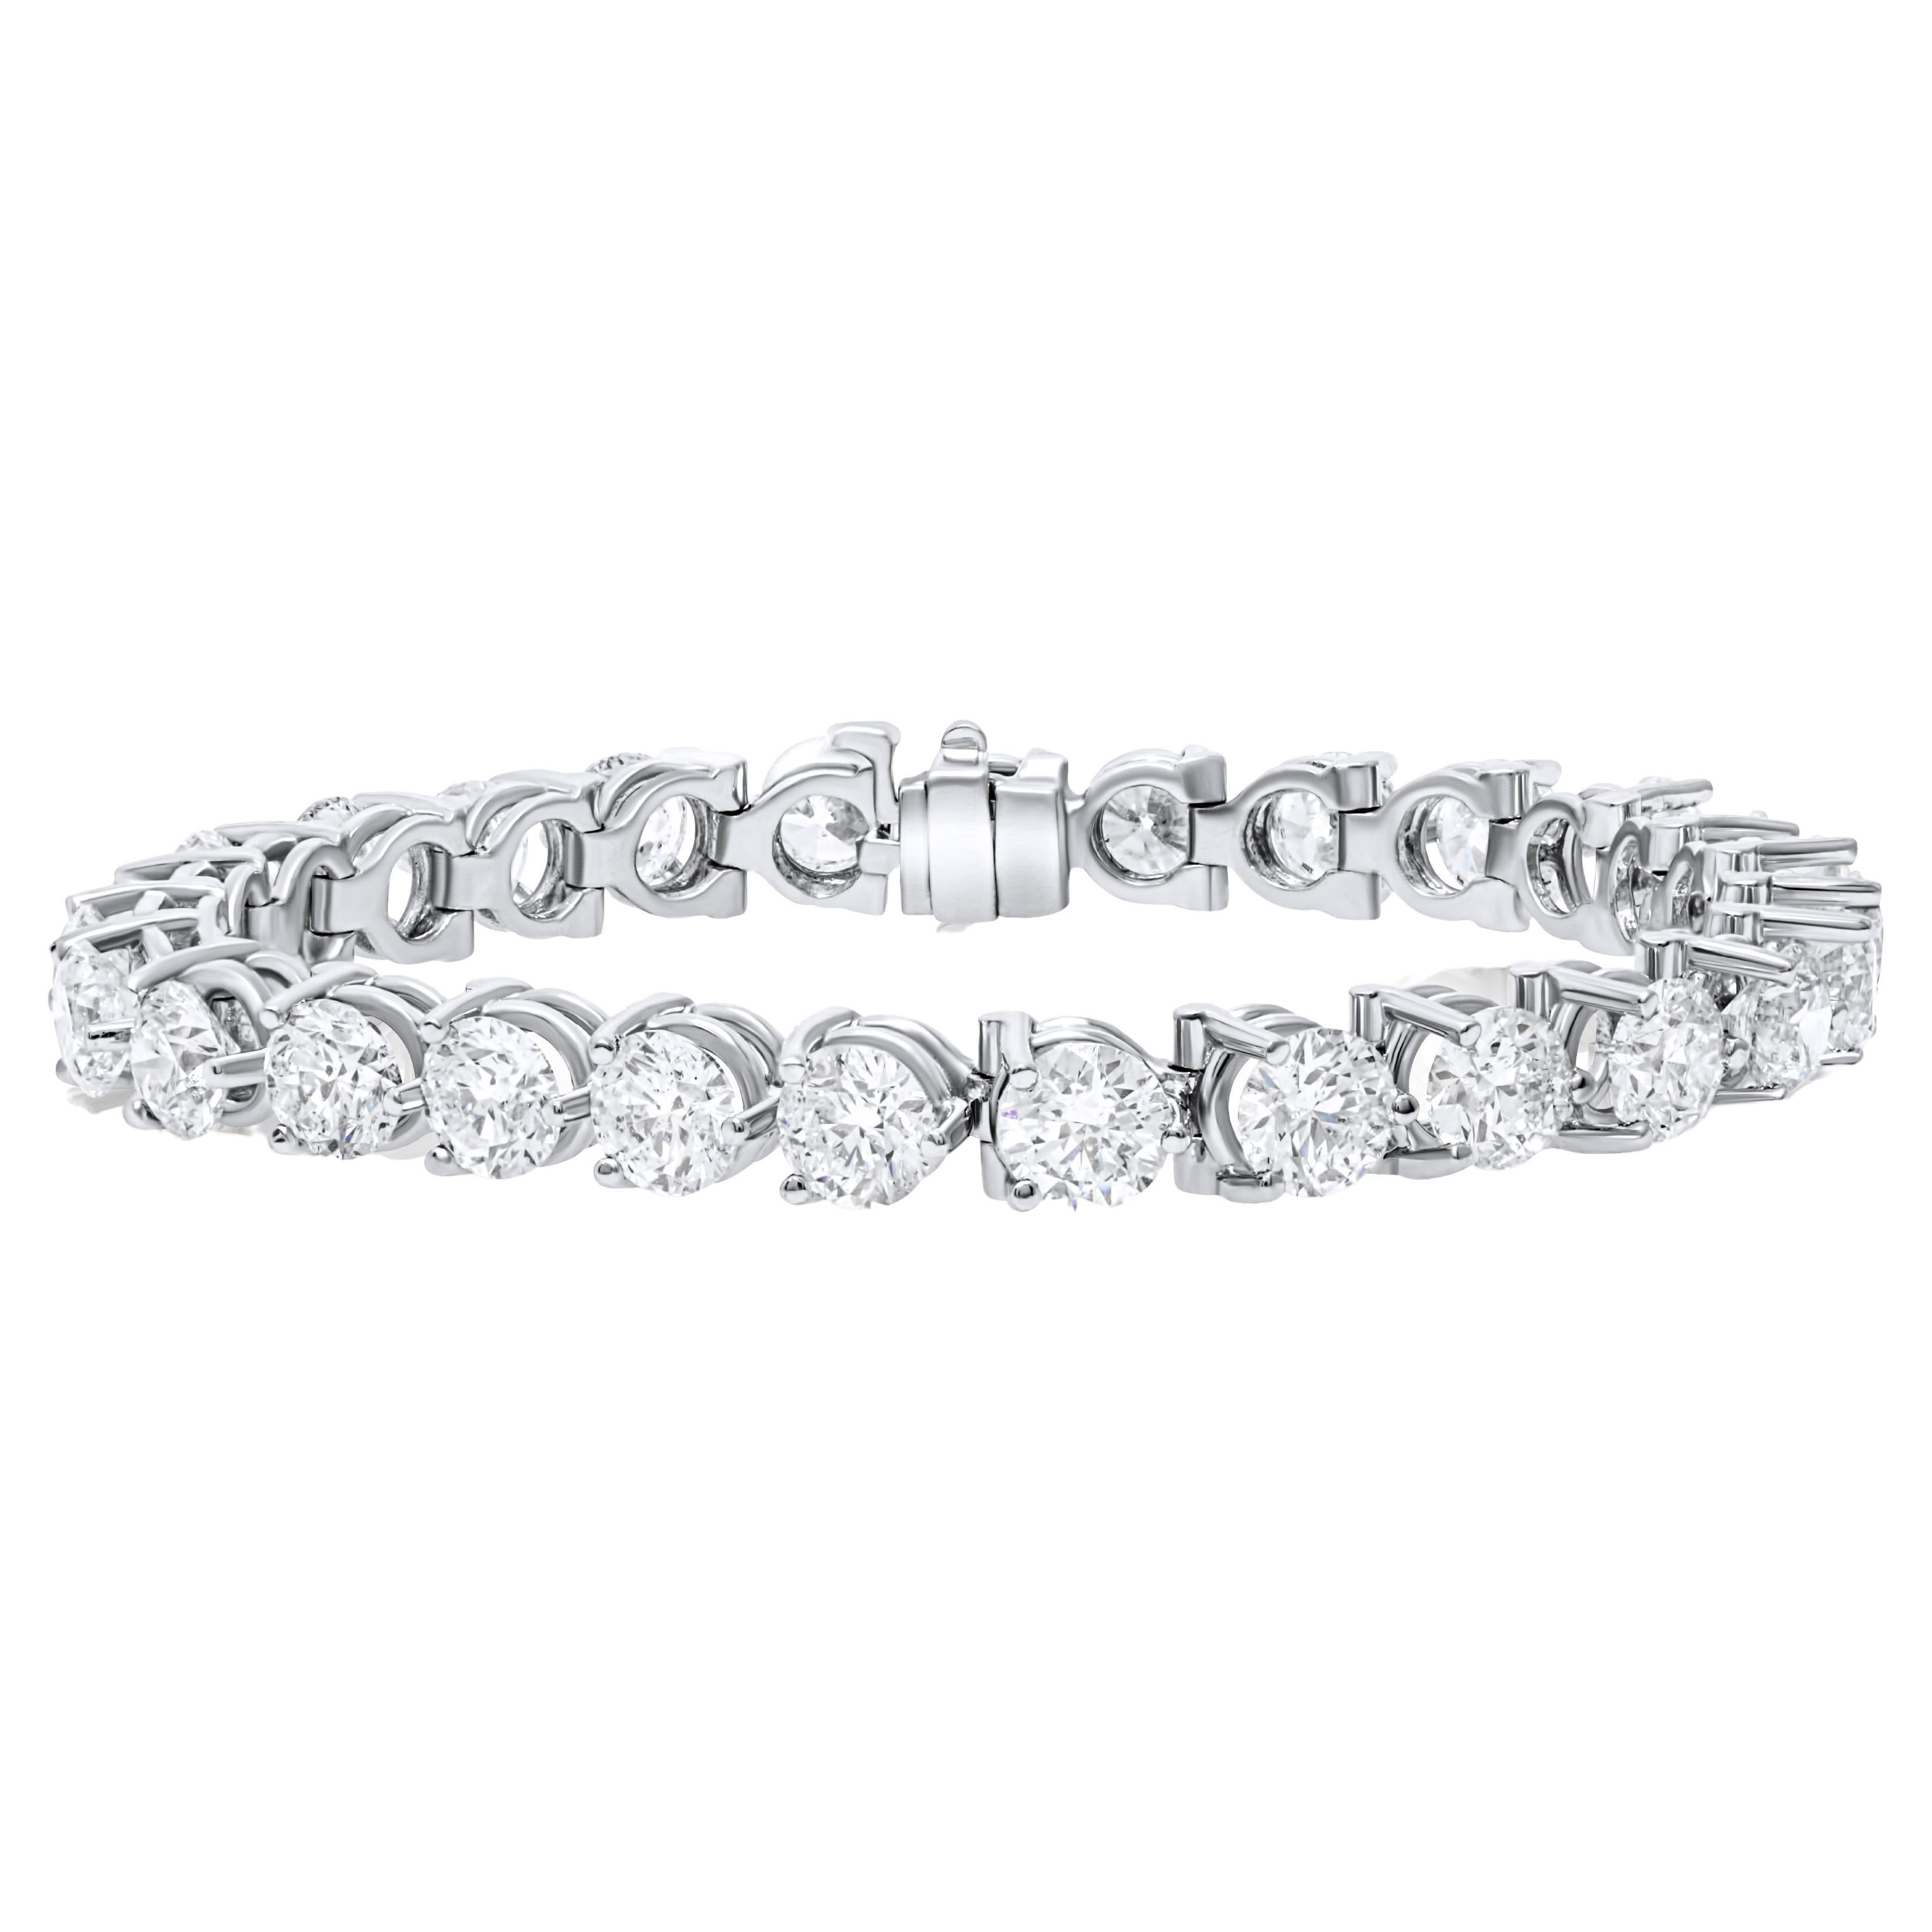 Diana M. 18 kt white gold 3 prong diamond tennis bracelet adorned with 5.60 cts